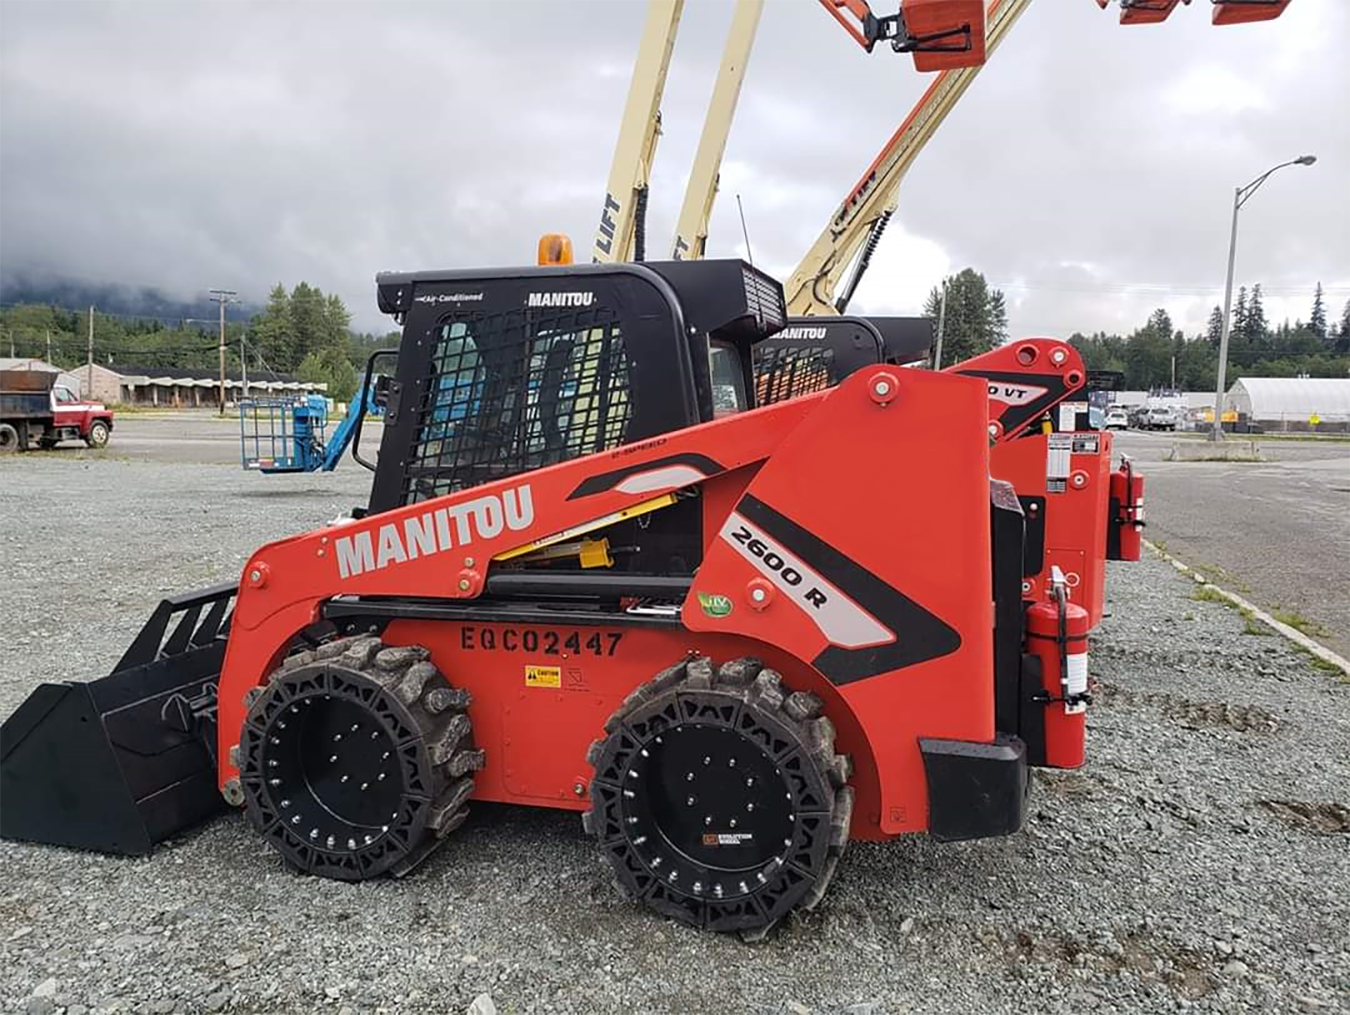 This image is about a Red Manitou Skid Steer using our flat free skid steer tires.